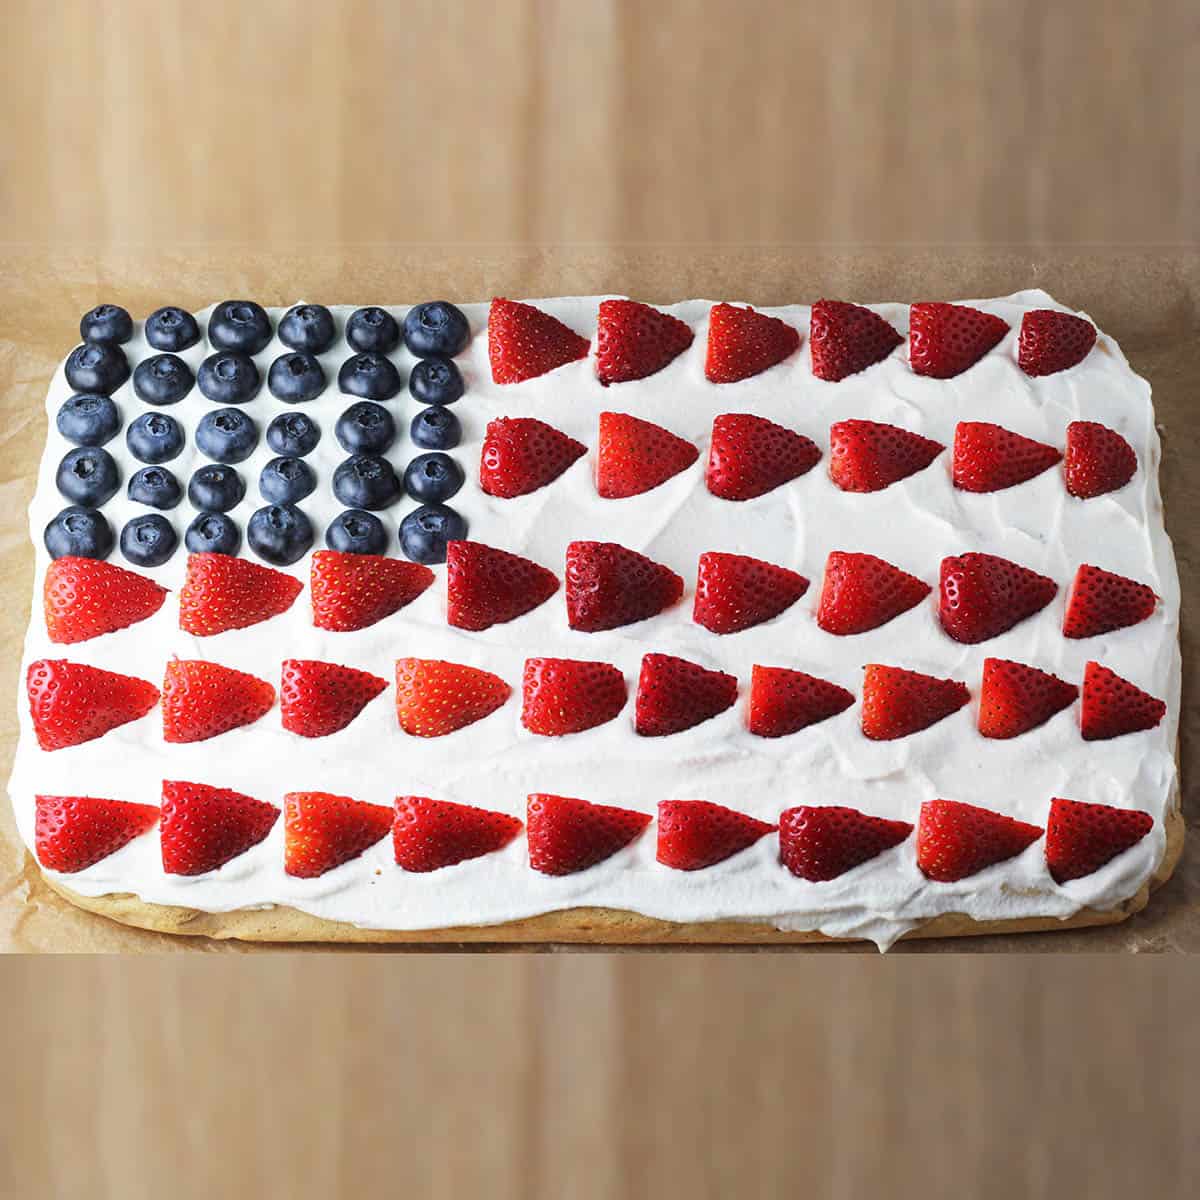 flag cake - vanilla sheet cake with whipped cream frosting with blueberries and sliced strawberries places to represent the American flag